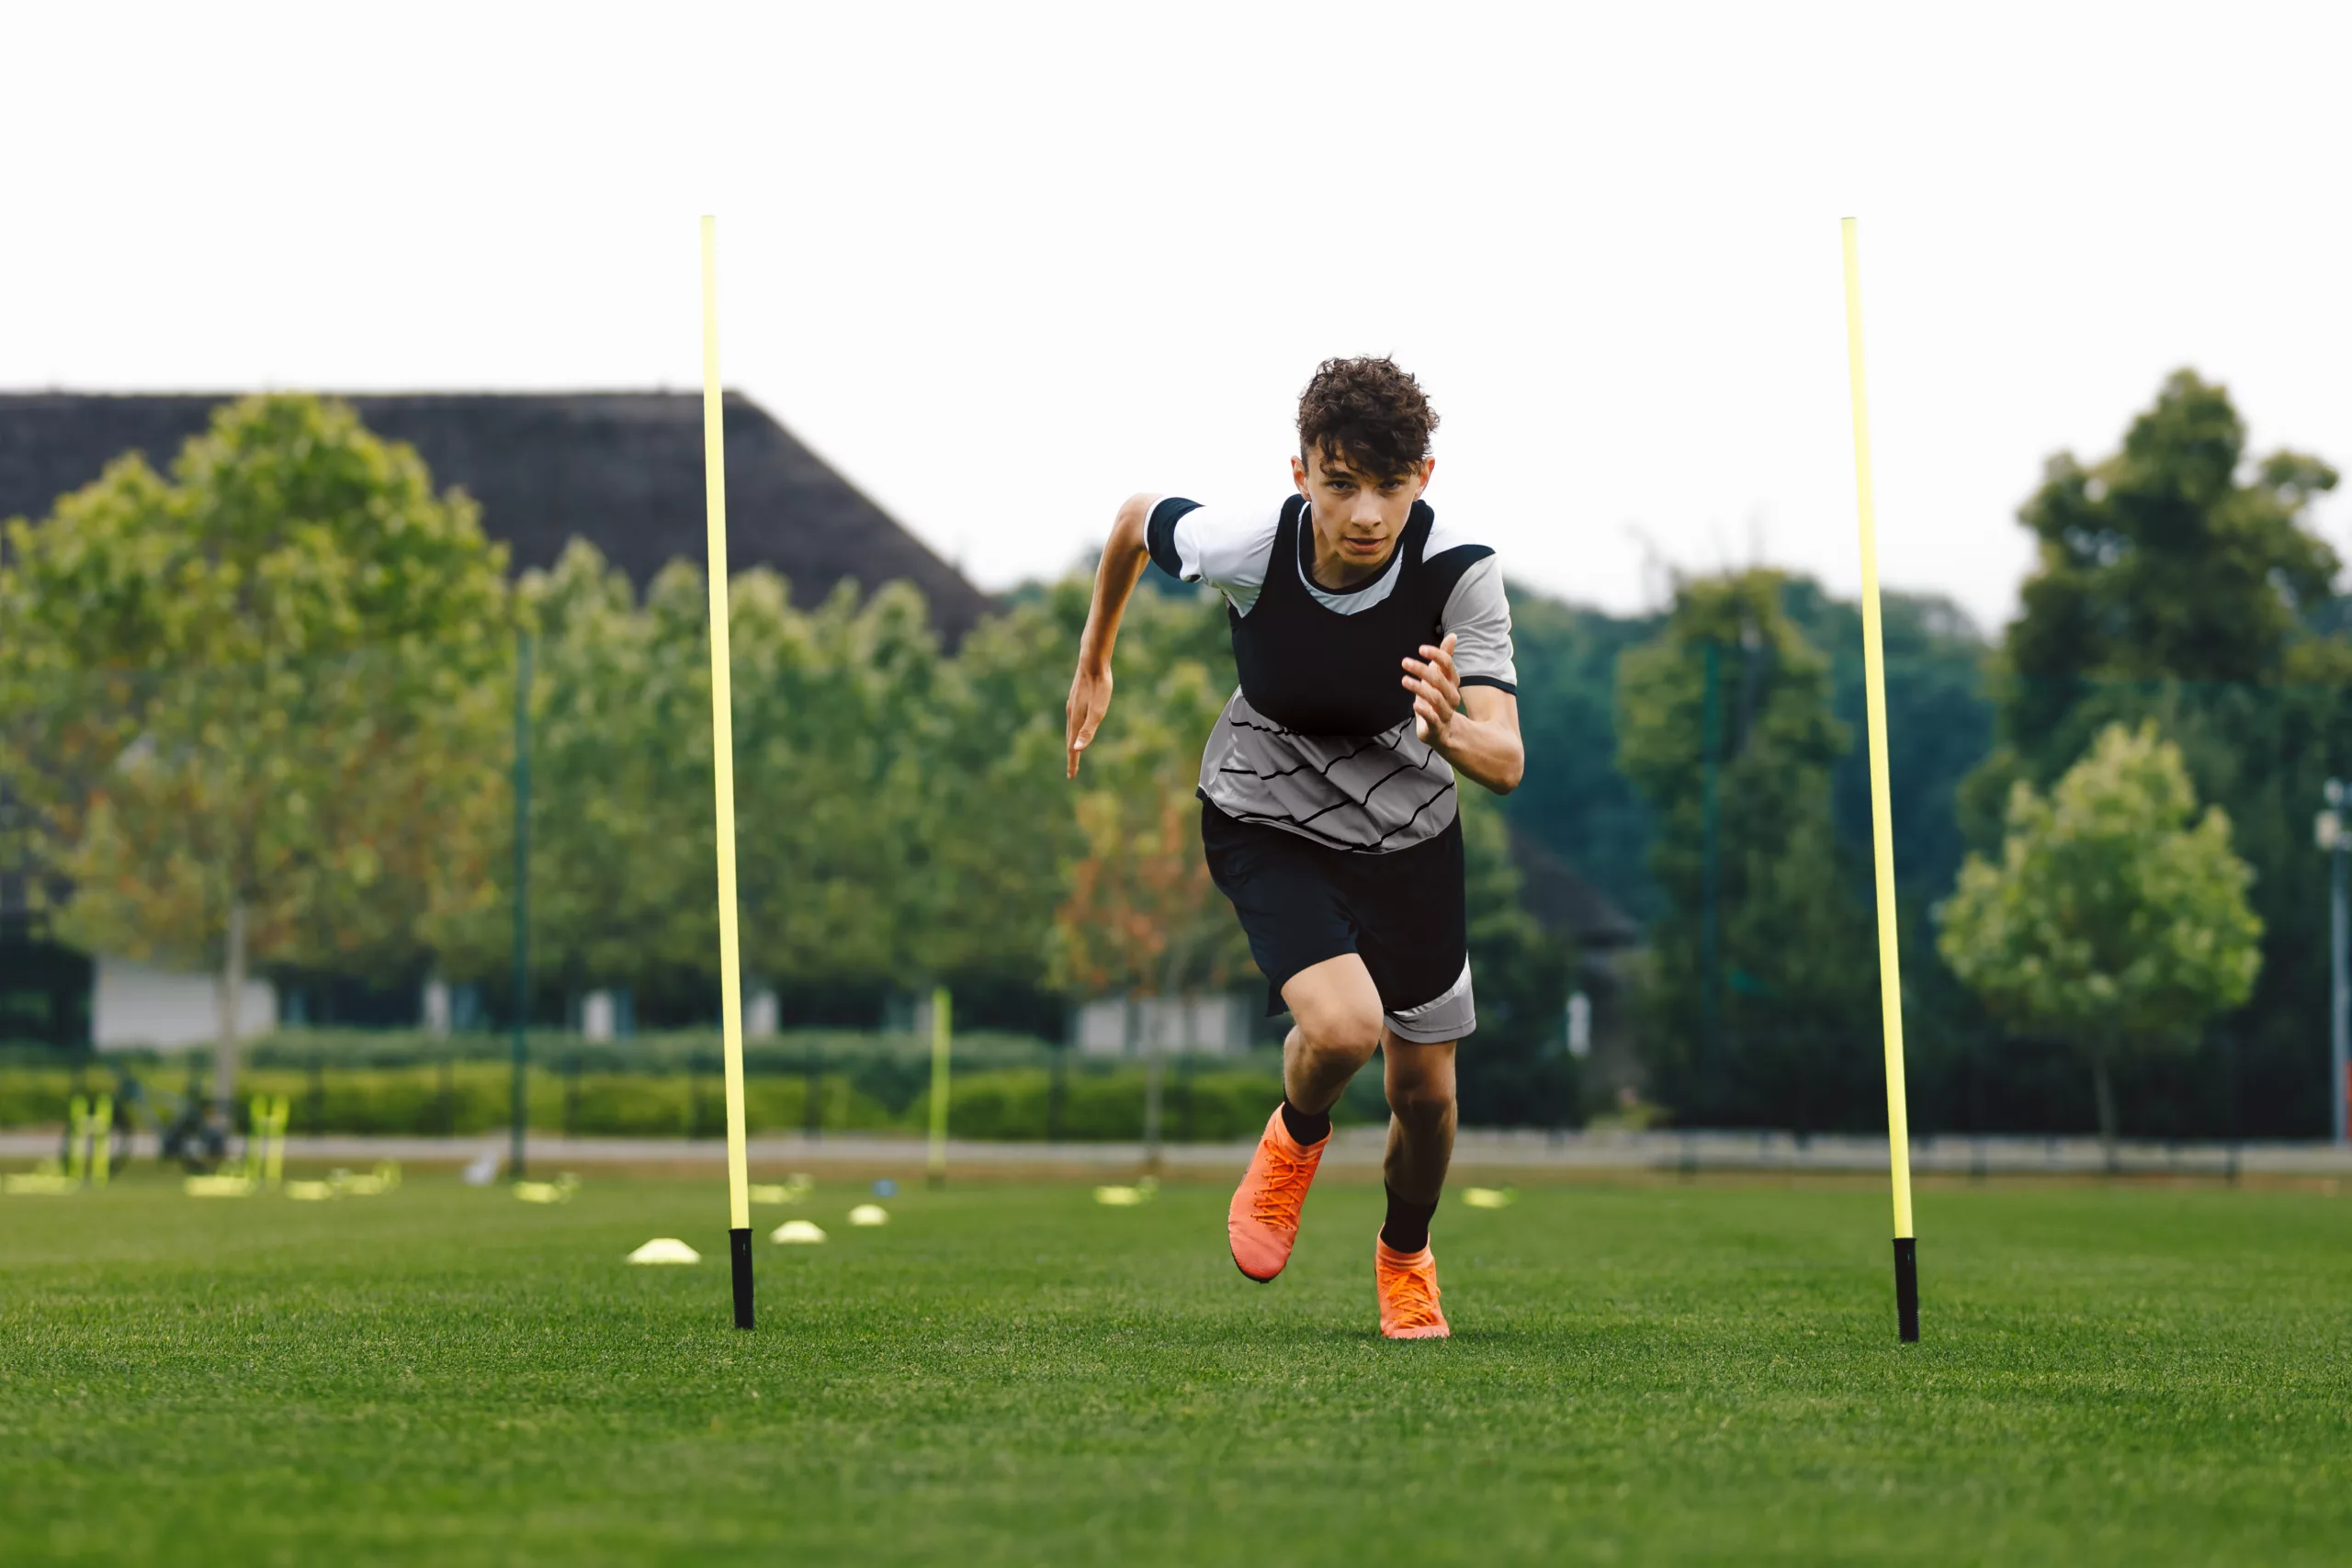 Fitness testing in sport games: the player performed badly. Then what?